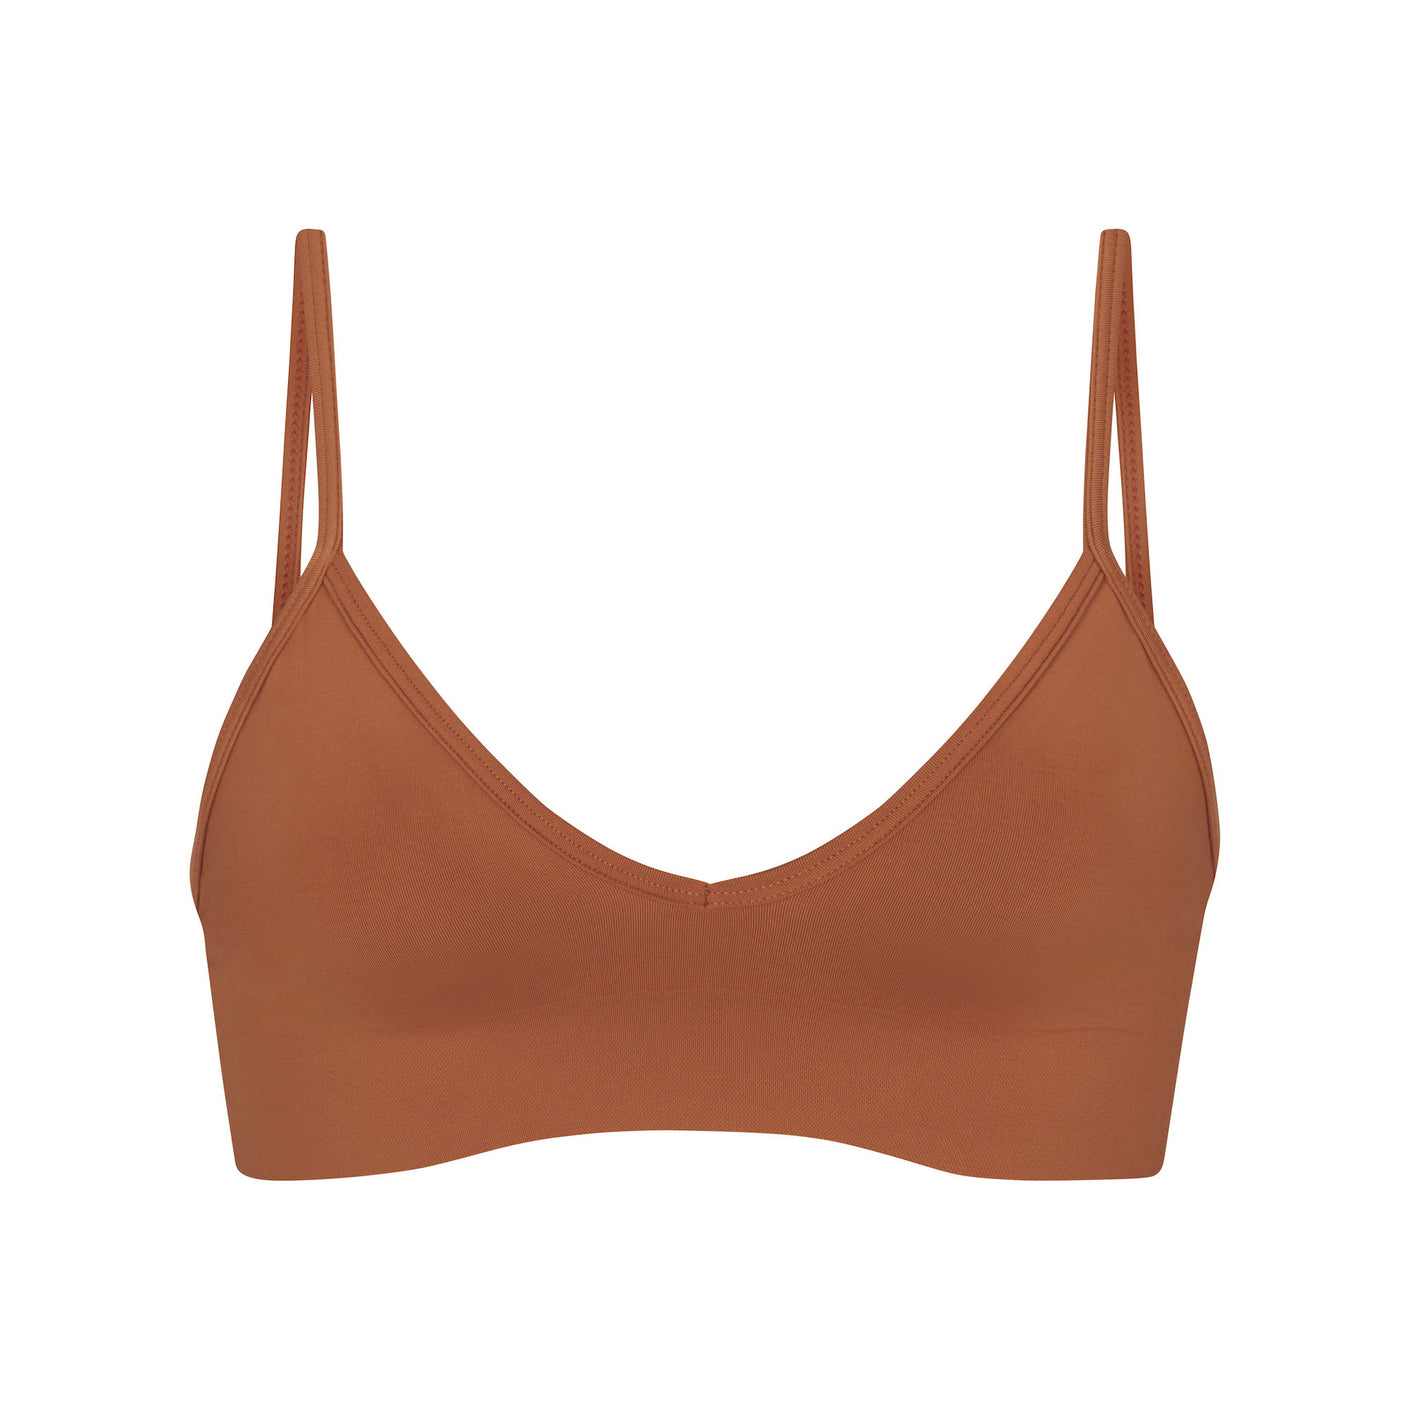 Zara Womens Seamless Lace Bralette - Get Best Price from